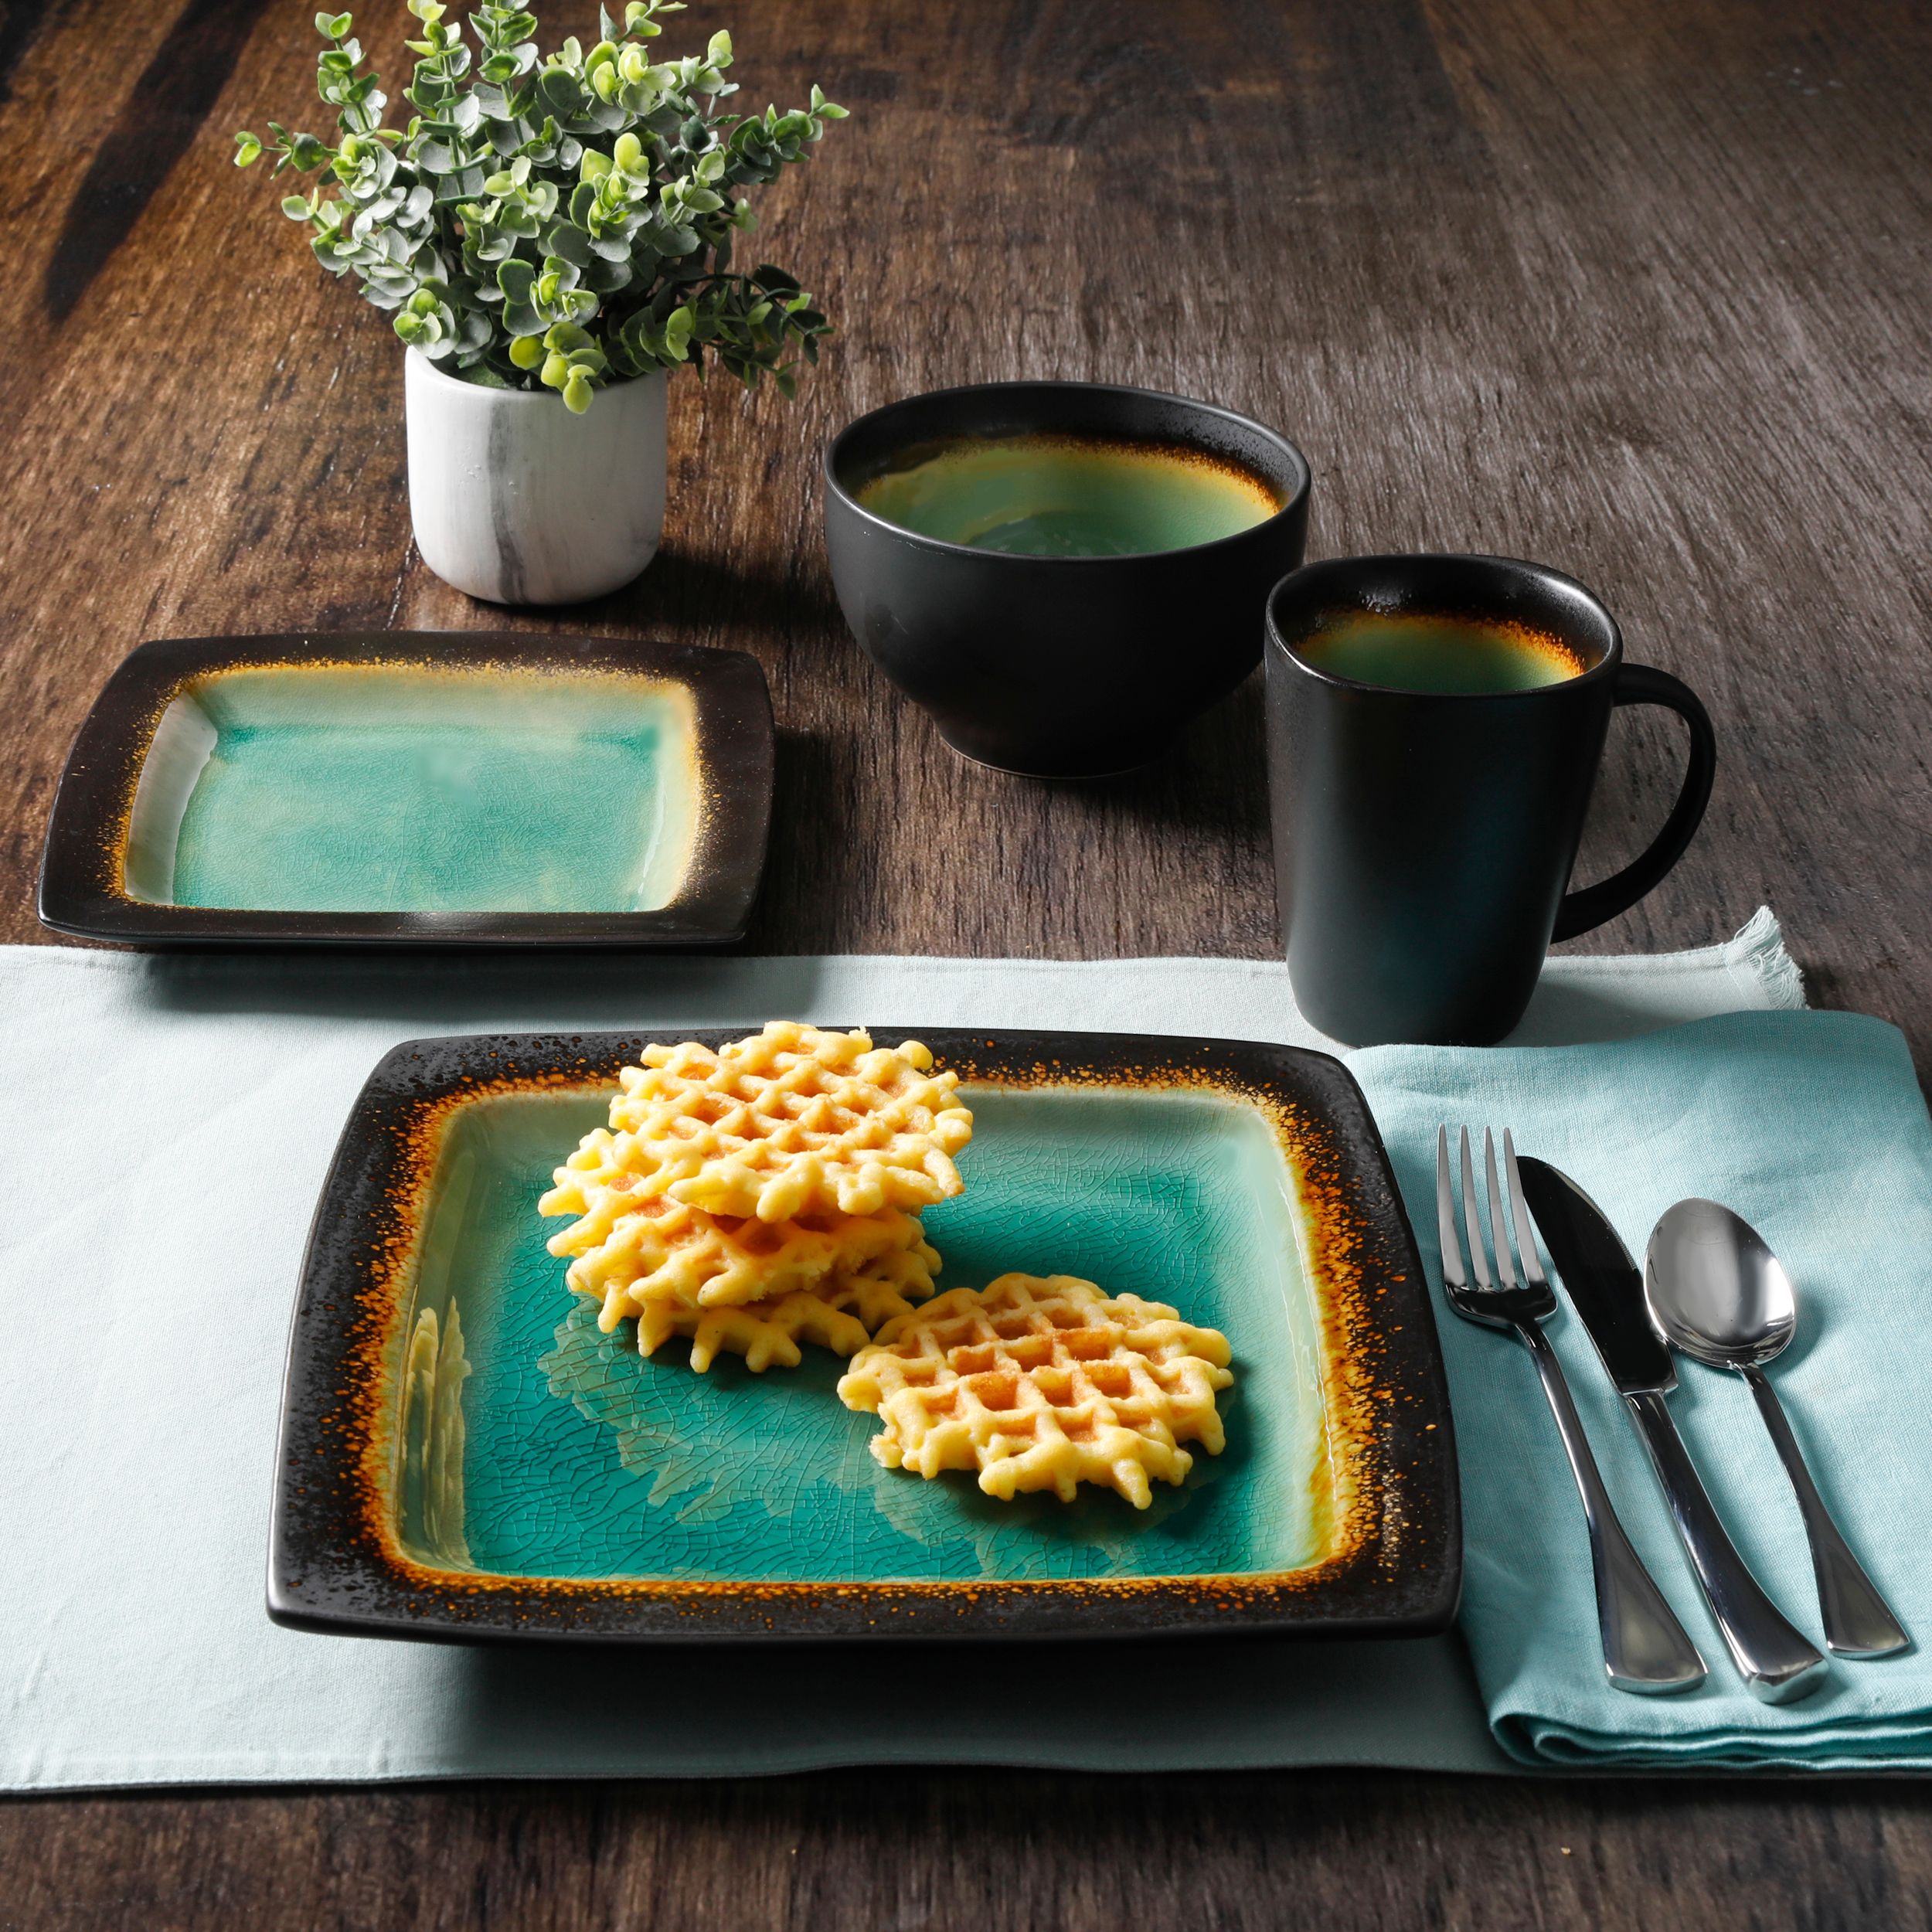 Gibson Home Ocean Oasis 16-Piece Dinnerware Set, Turquoise - image 2 of 10